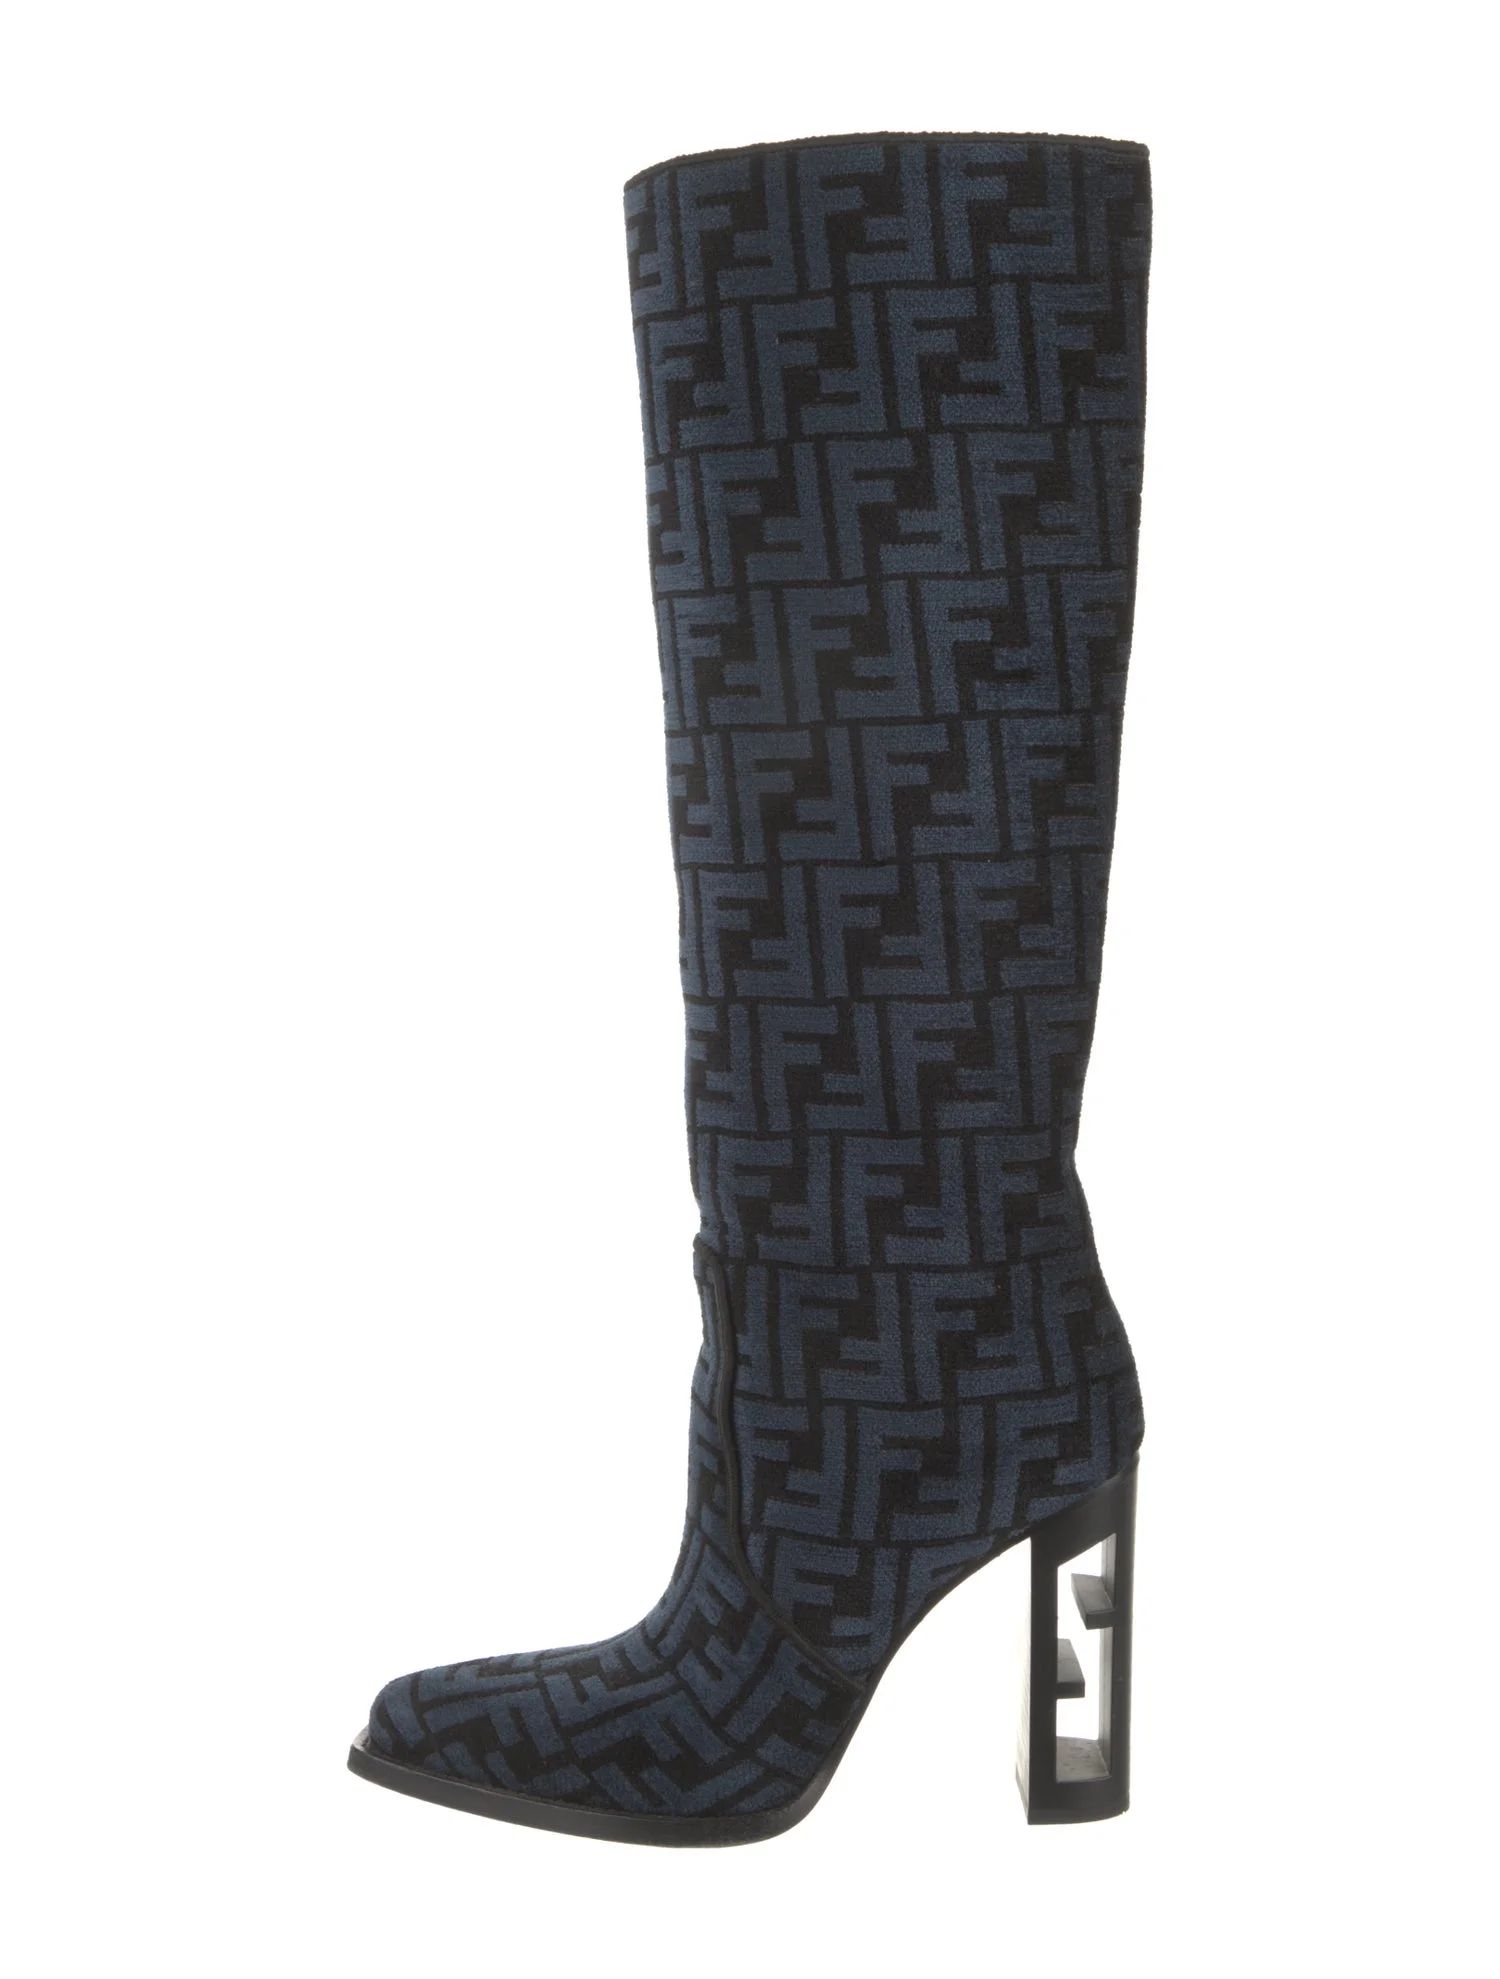 Zucca FF Logo Printed Boots | The RealReal